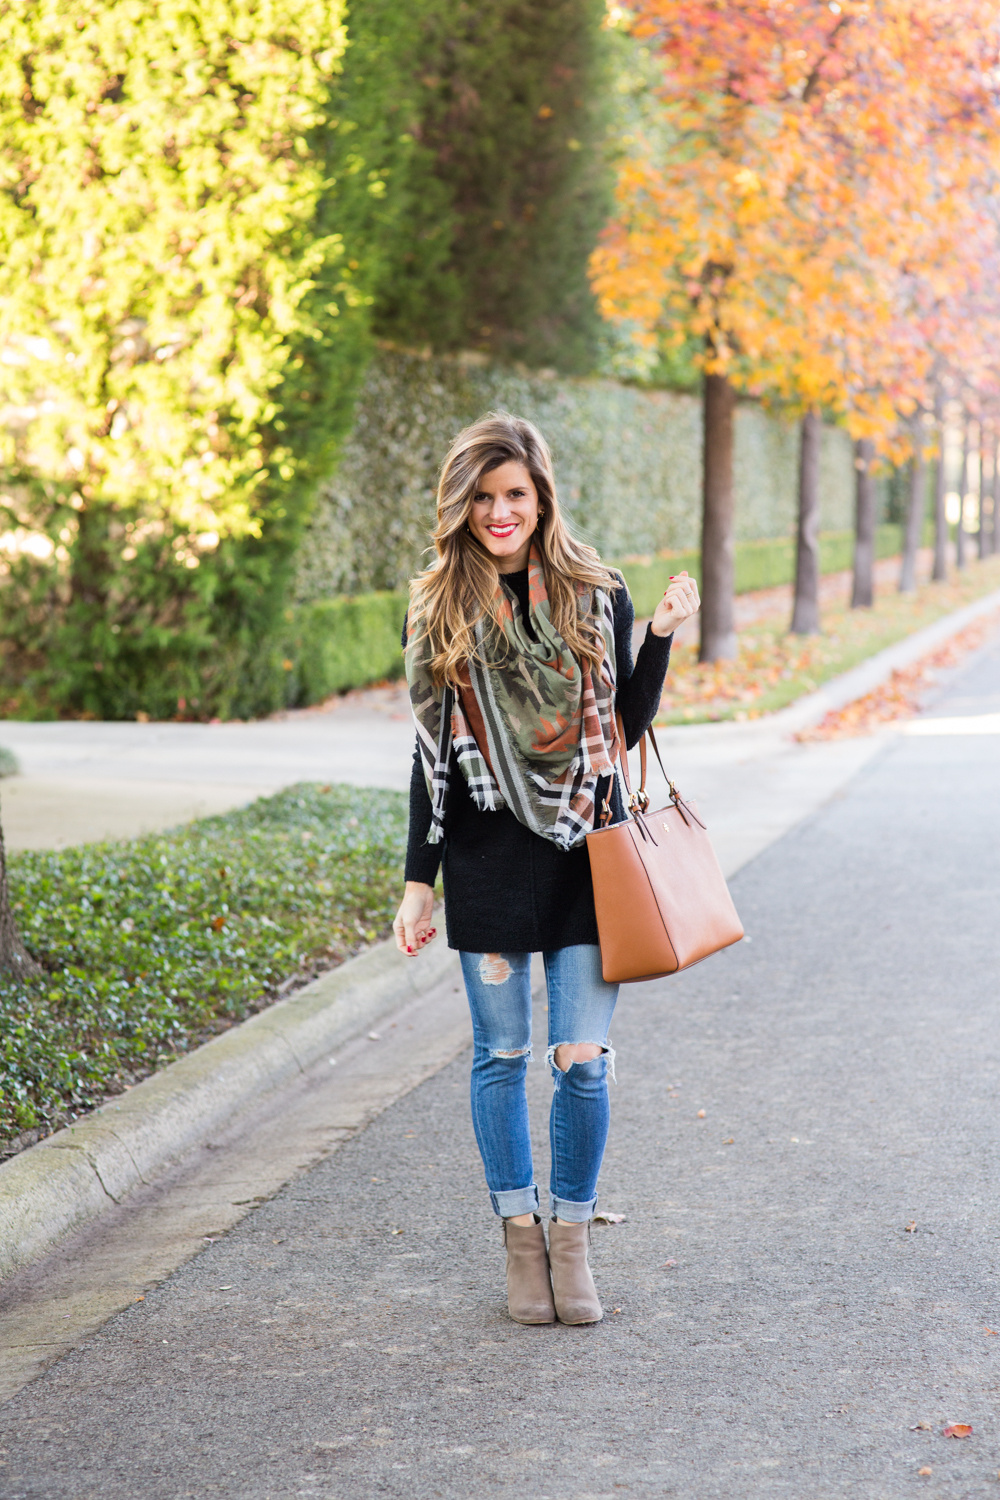 Scarf Outfit + Ripped Jeans + Ankle Booties